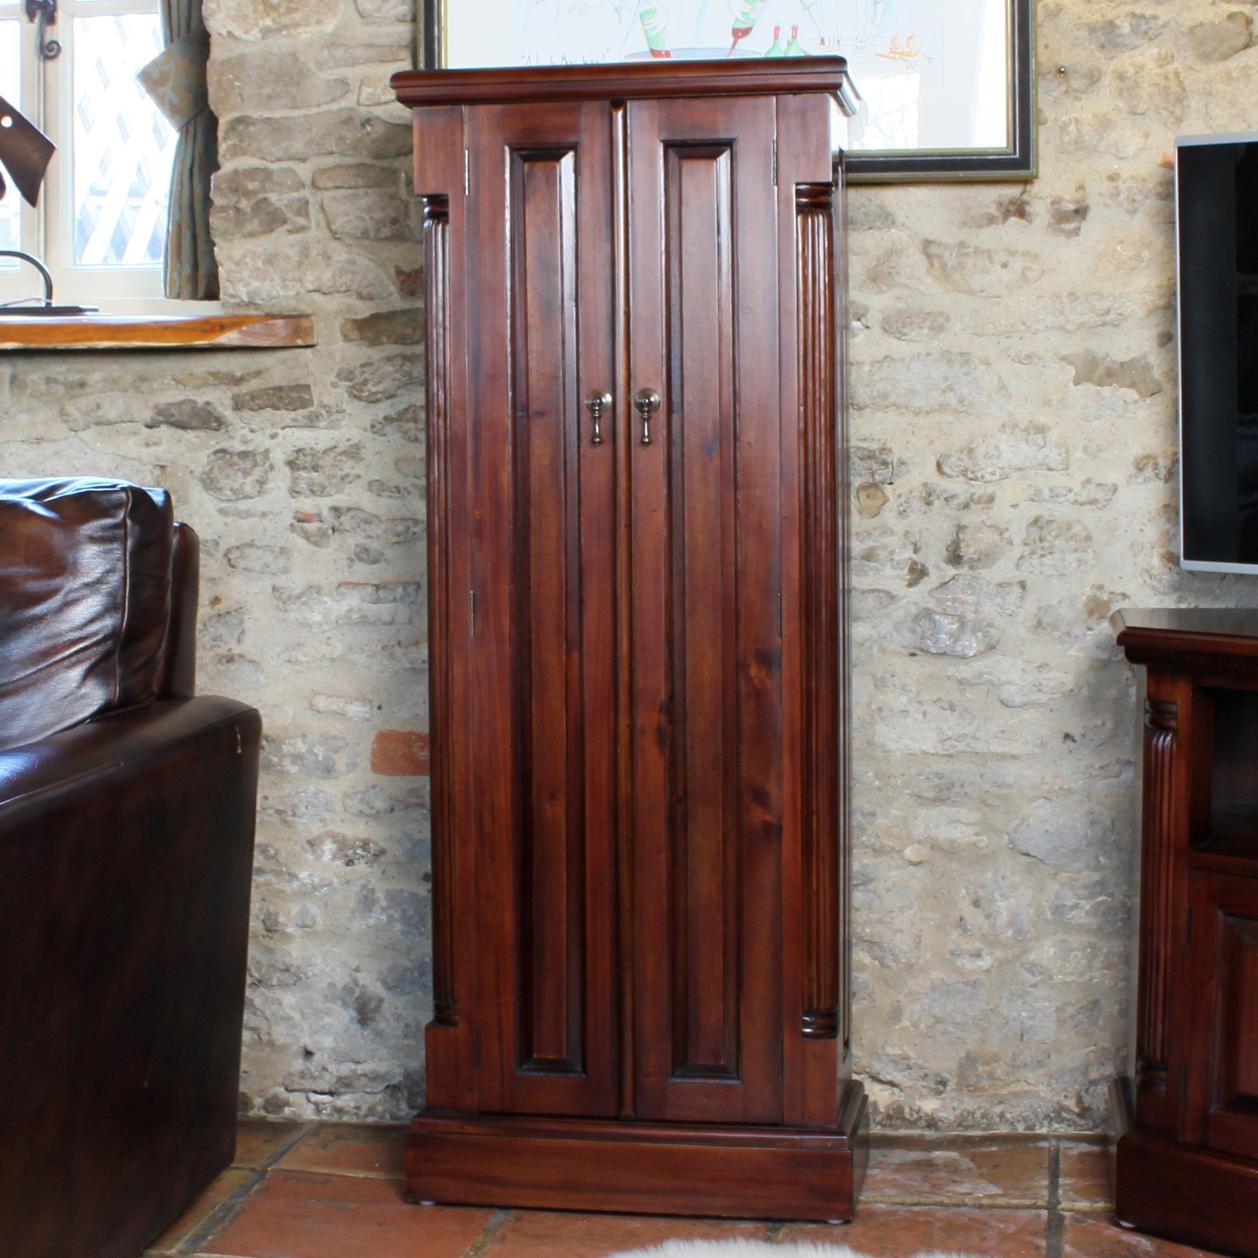 The wooden furniture stores la roque mahogany cd and dvd